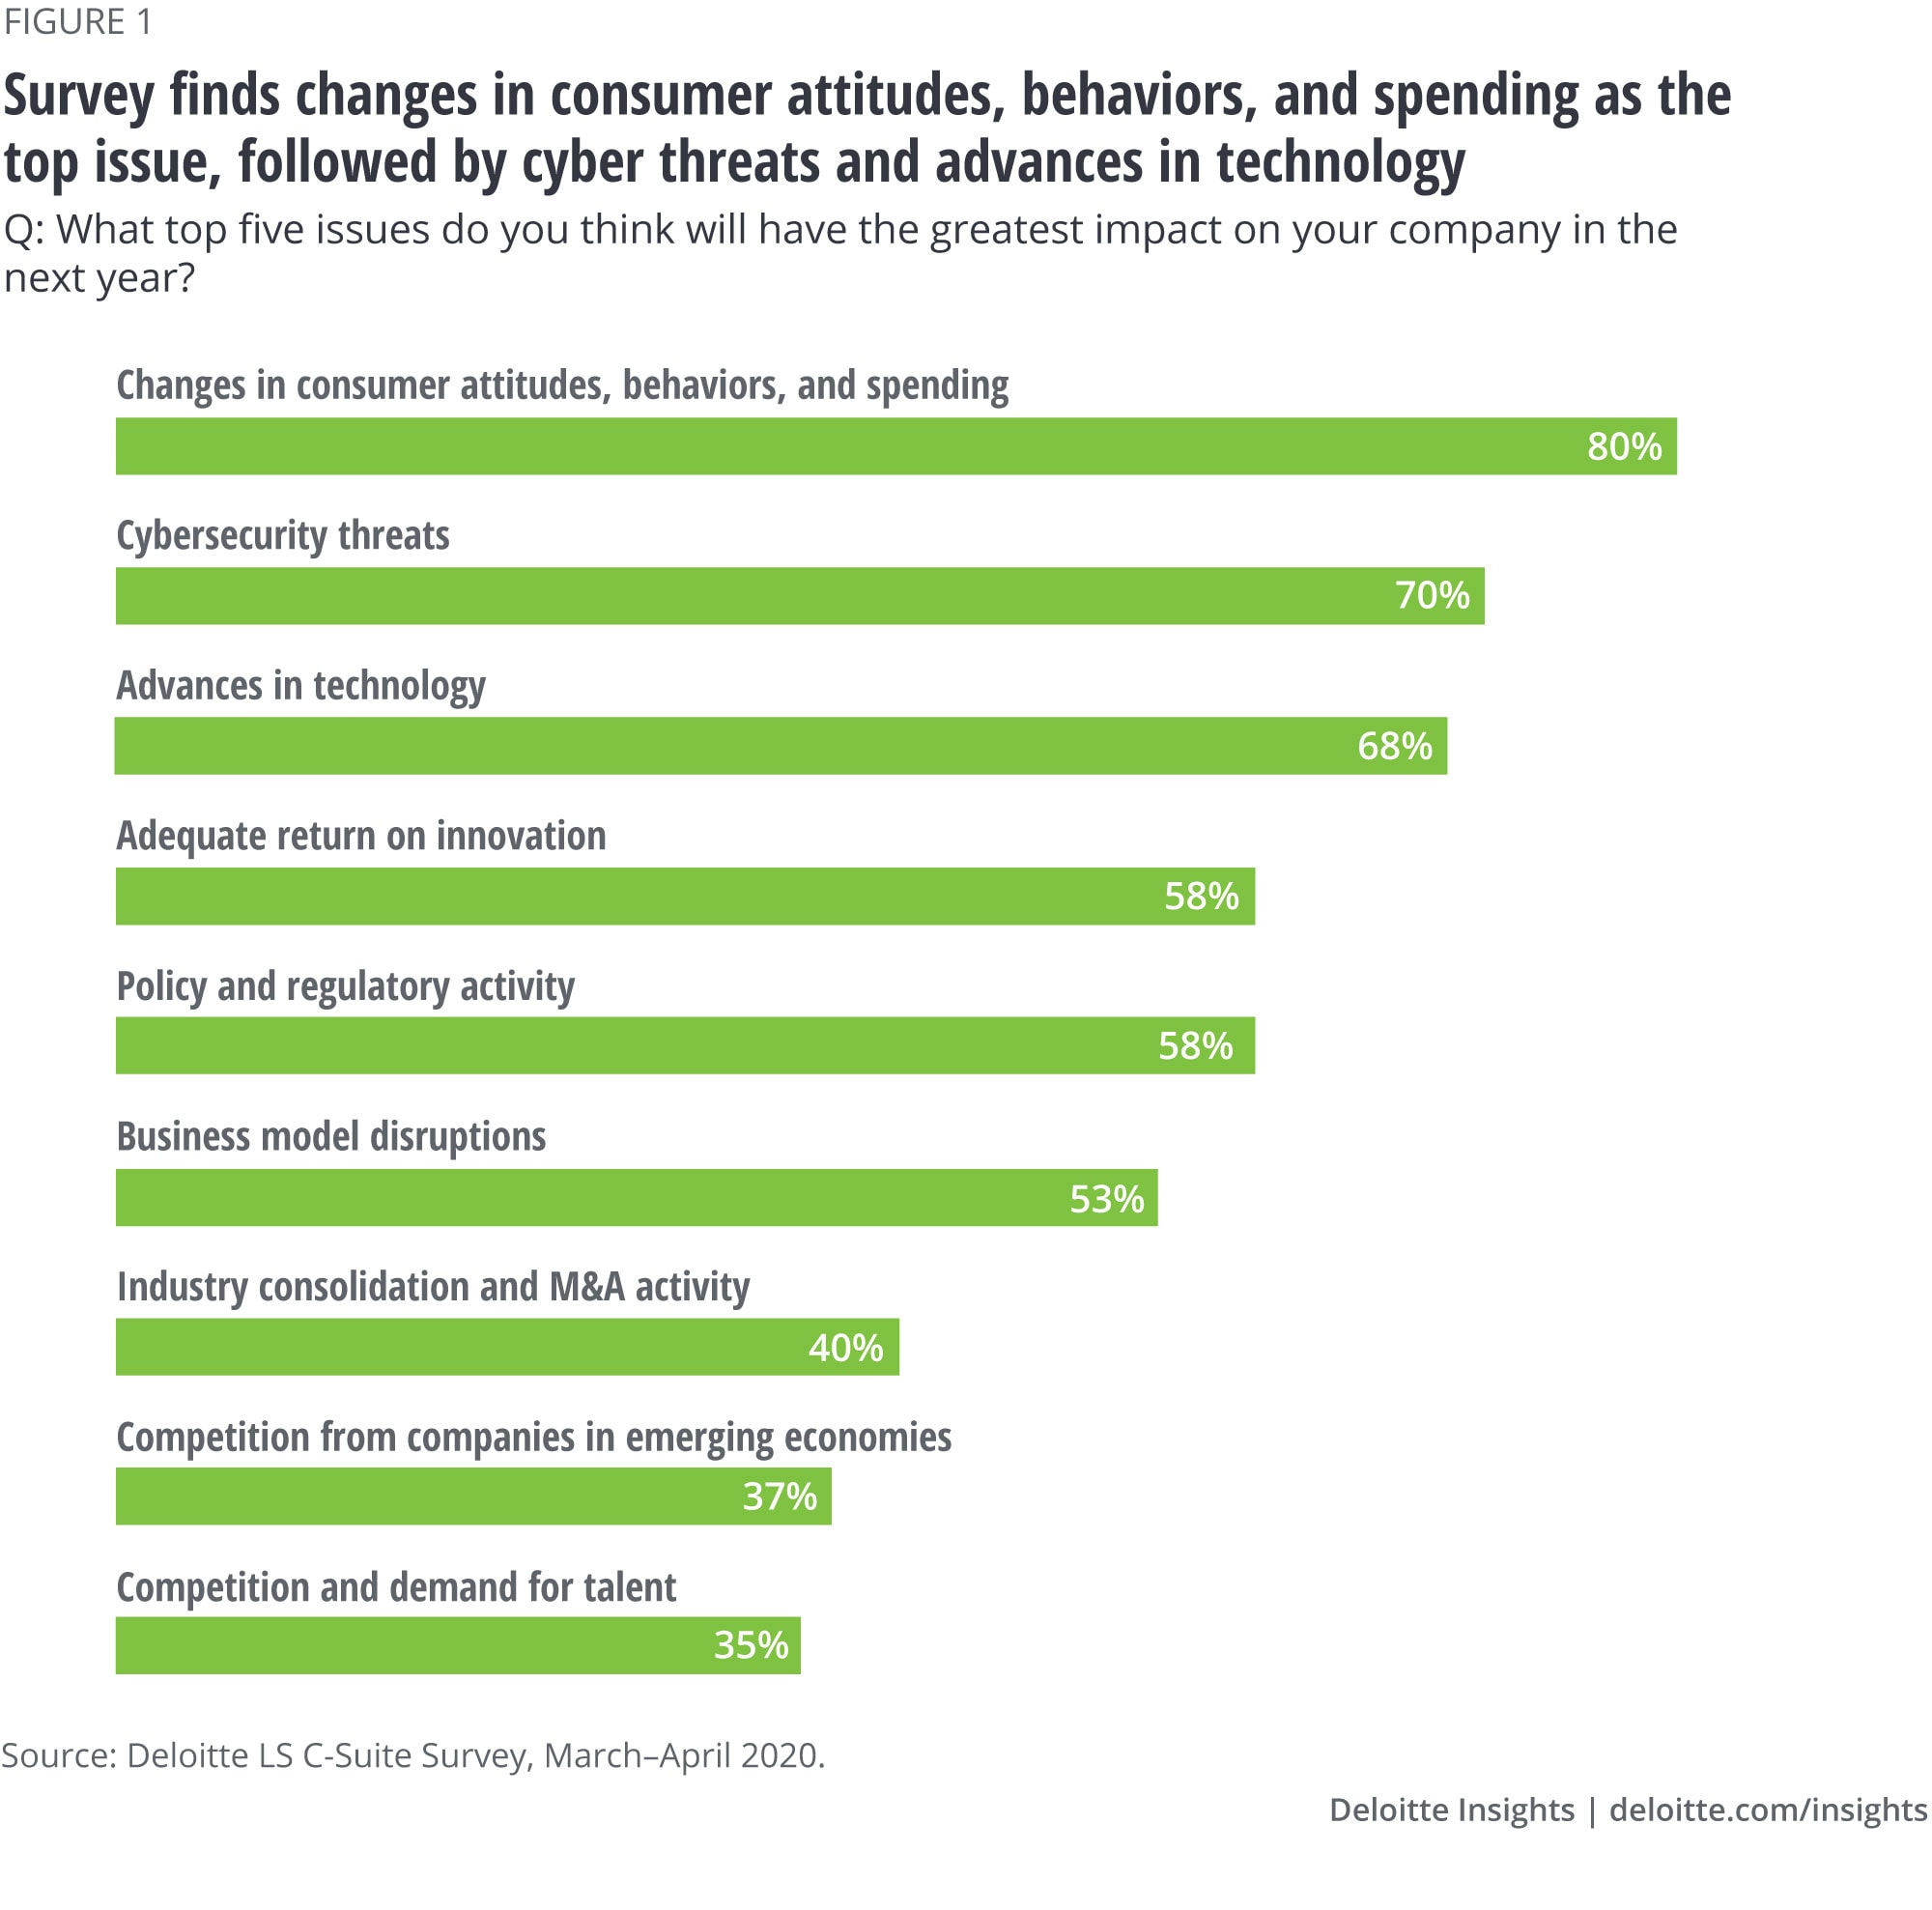 Survey finds the changes in consumer attitudes, behaviors, and spending as the top issue, followed by cyber threats and advances in technology